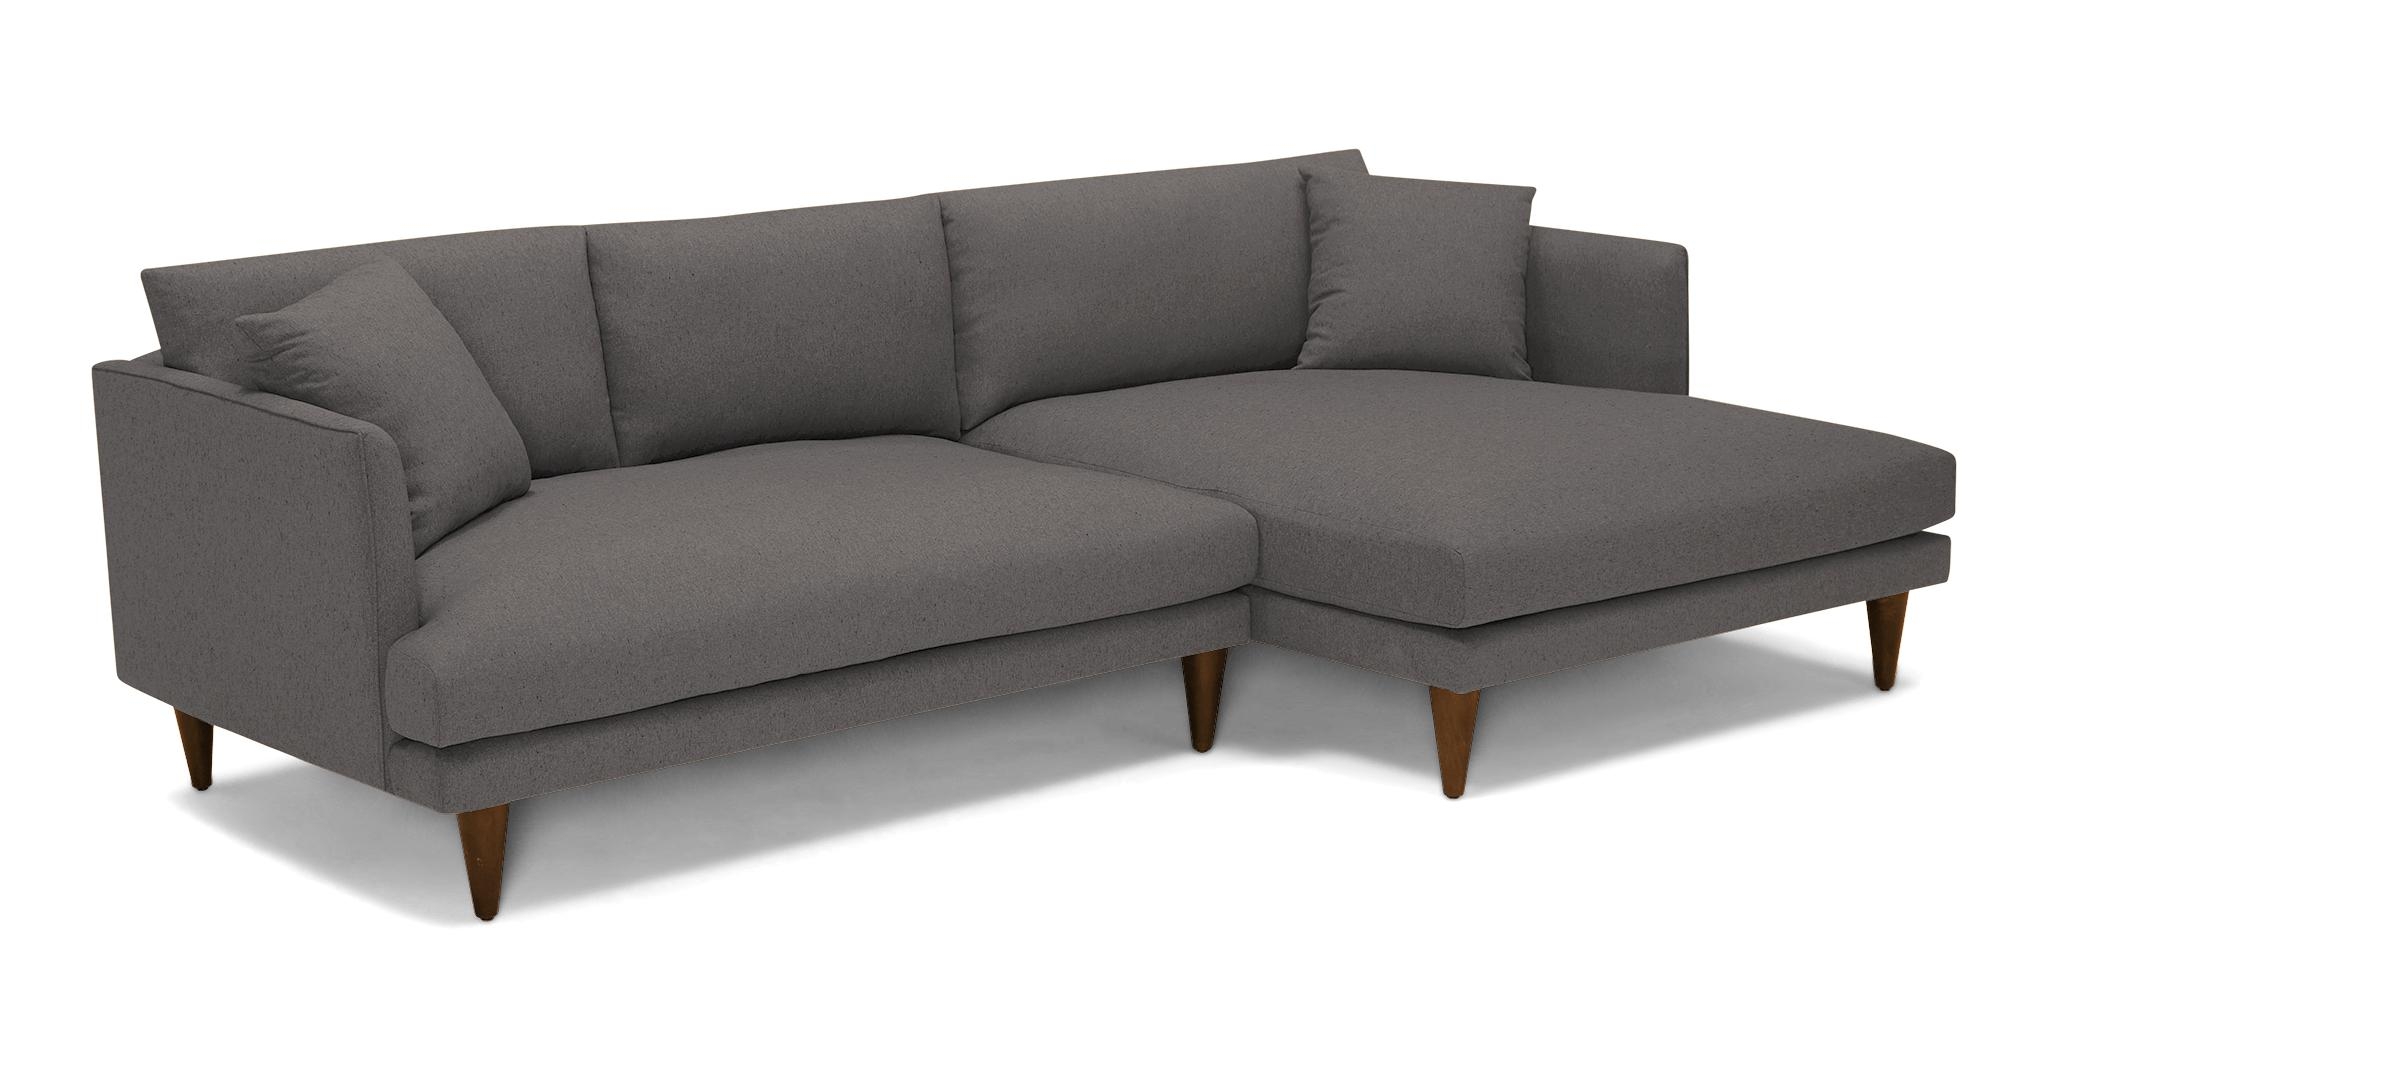 Gray Lewis Mid Century Modern Sectional - Cordova Eclipse - Mocha - Right - Cone - Image 1